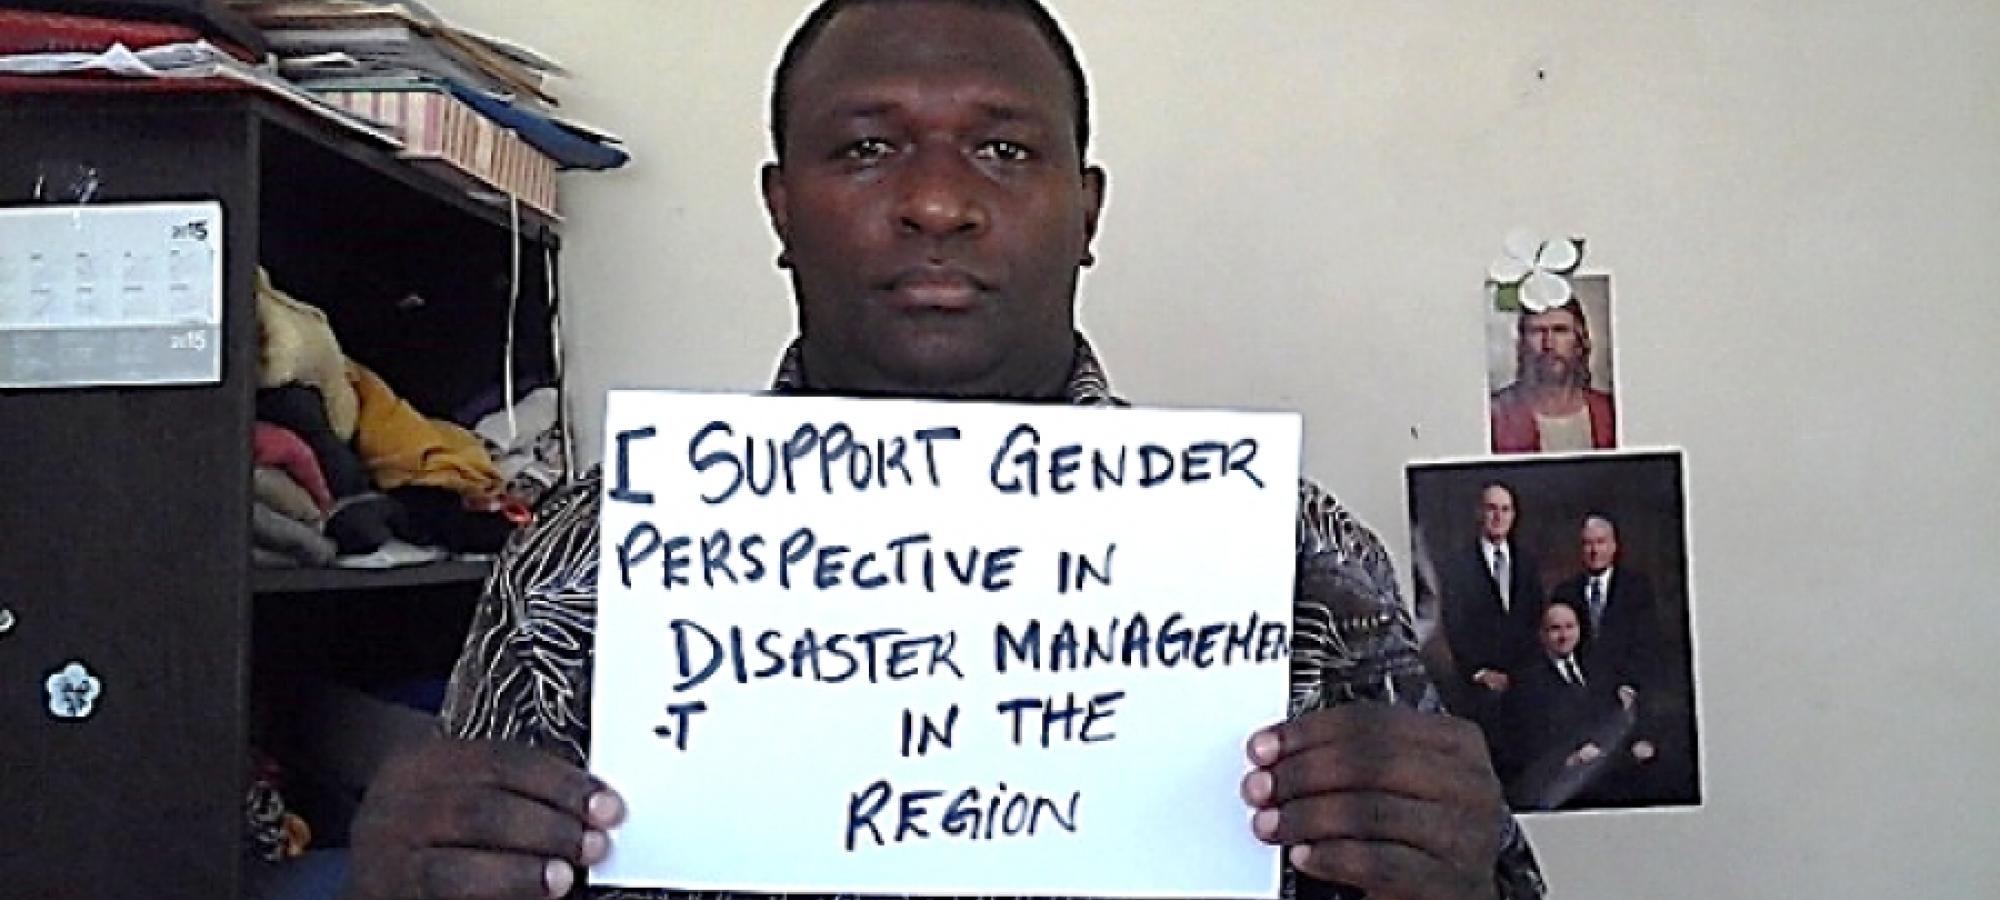 Call for gender perspective in disaster management in the region